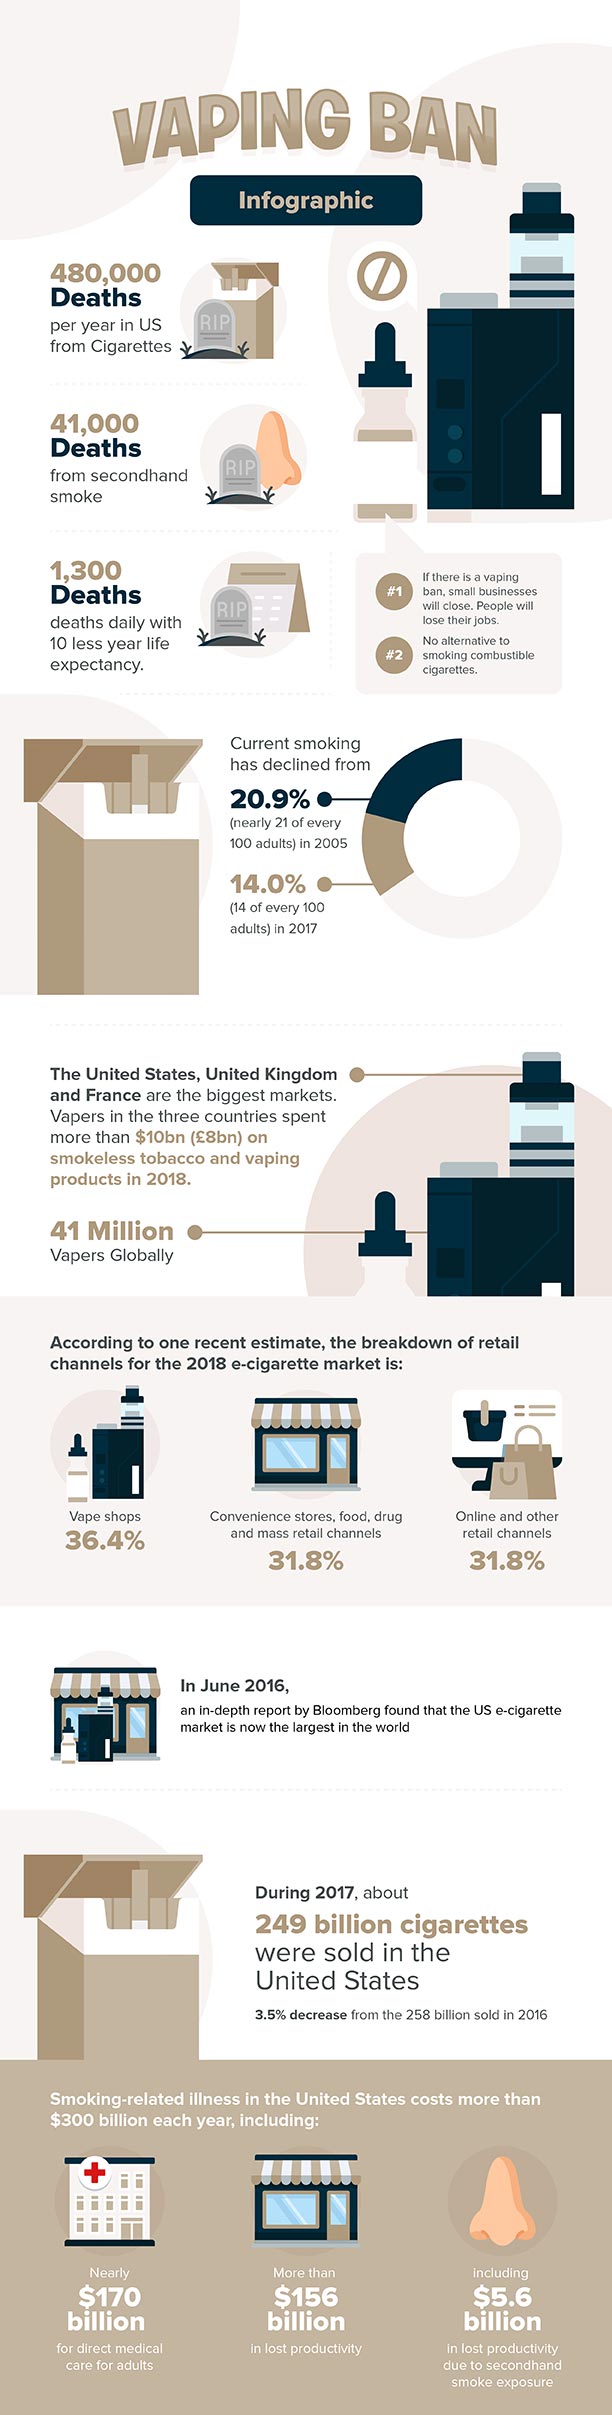 Vaping Ban Infographic: Health and Economic Impacts of a Vaping Ban